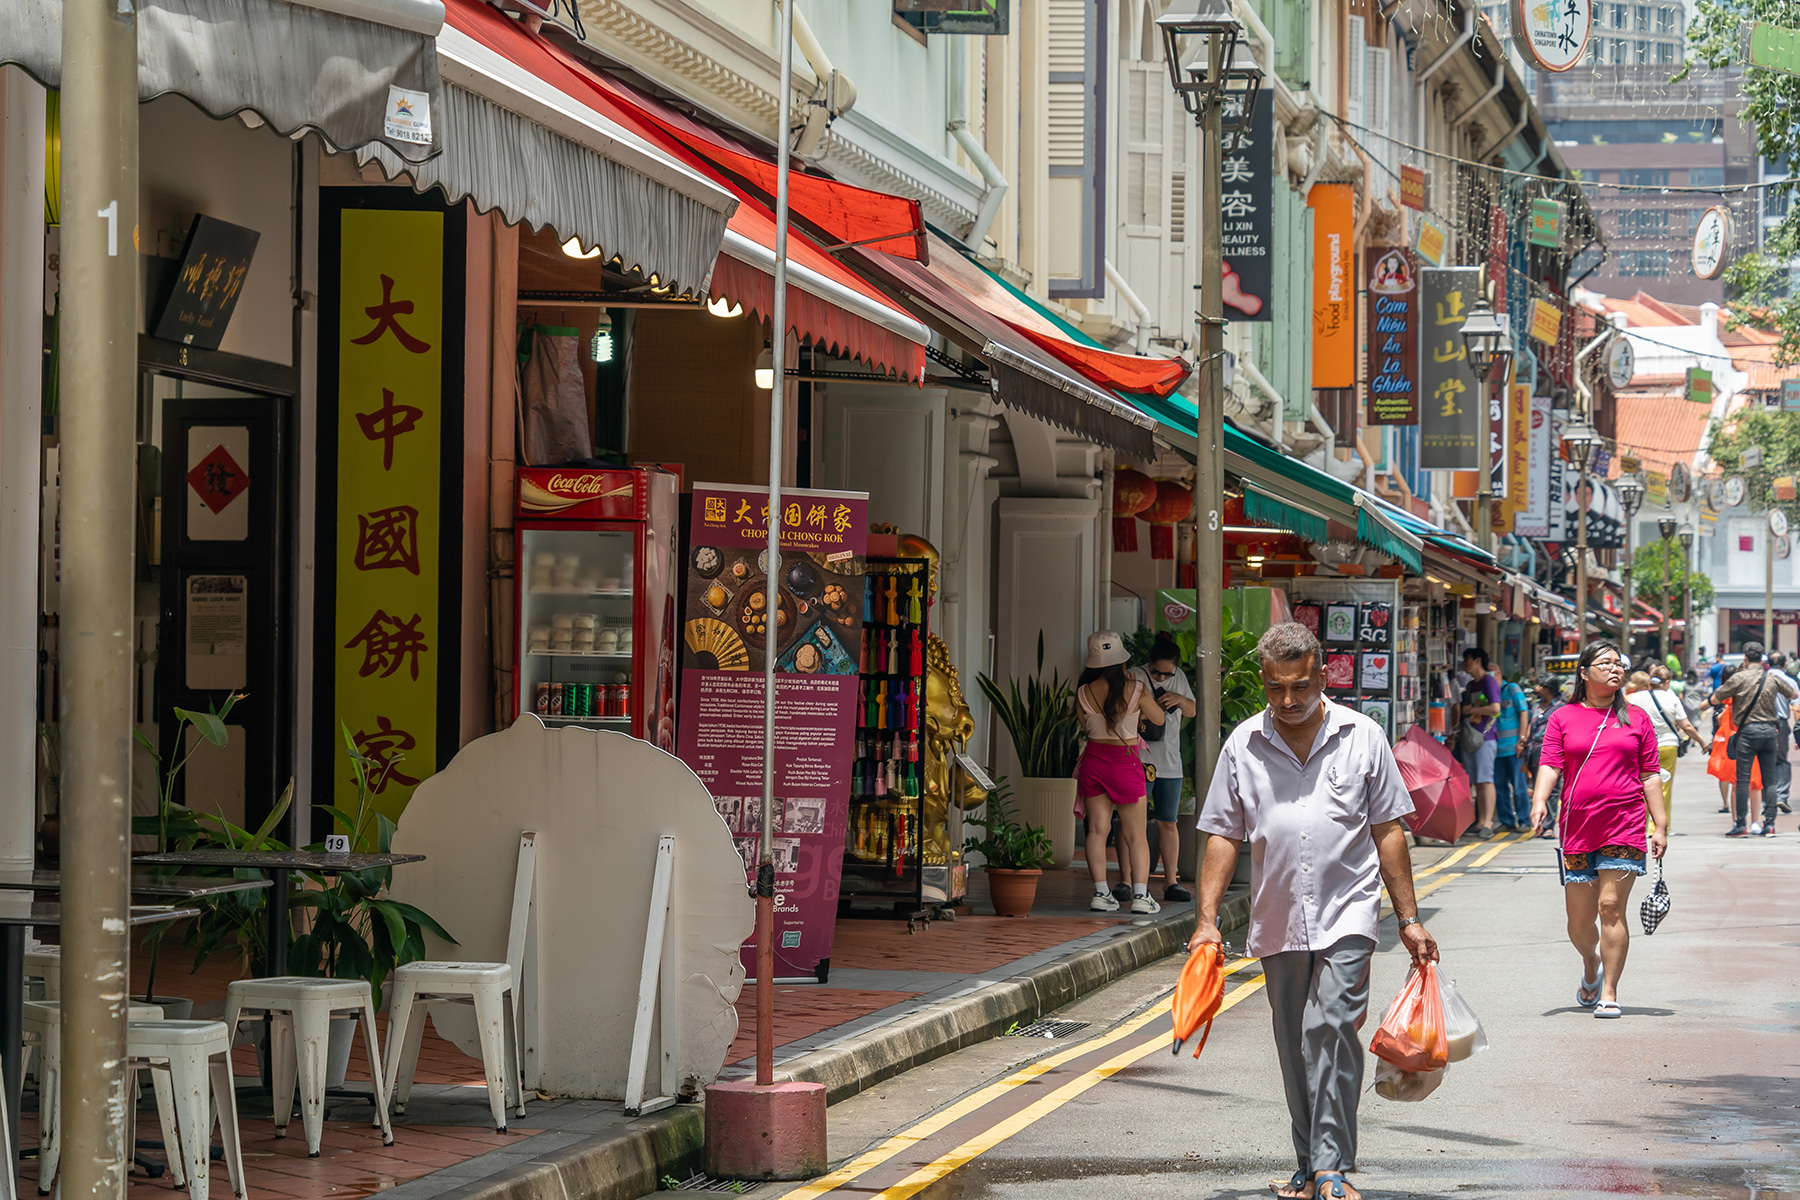 A man walking down the street in Singapore's Chinatown